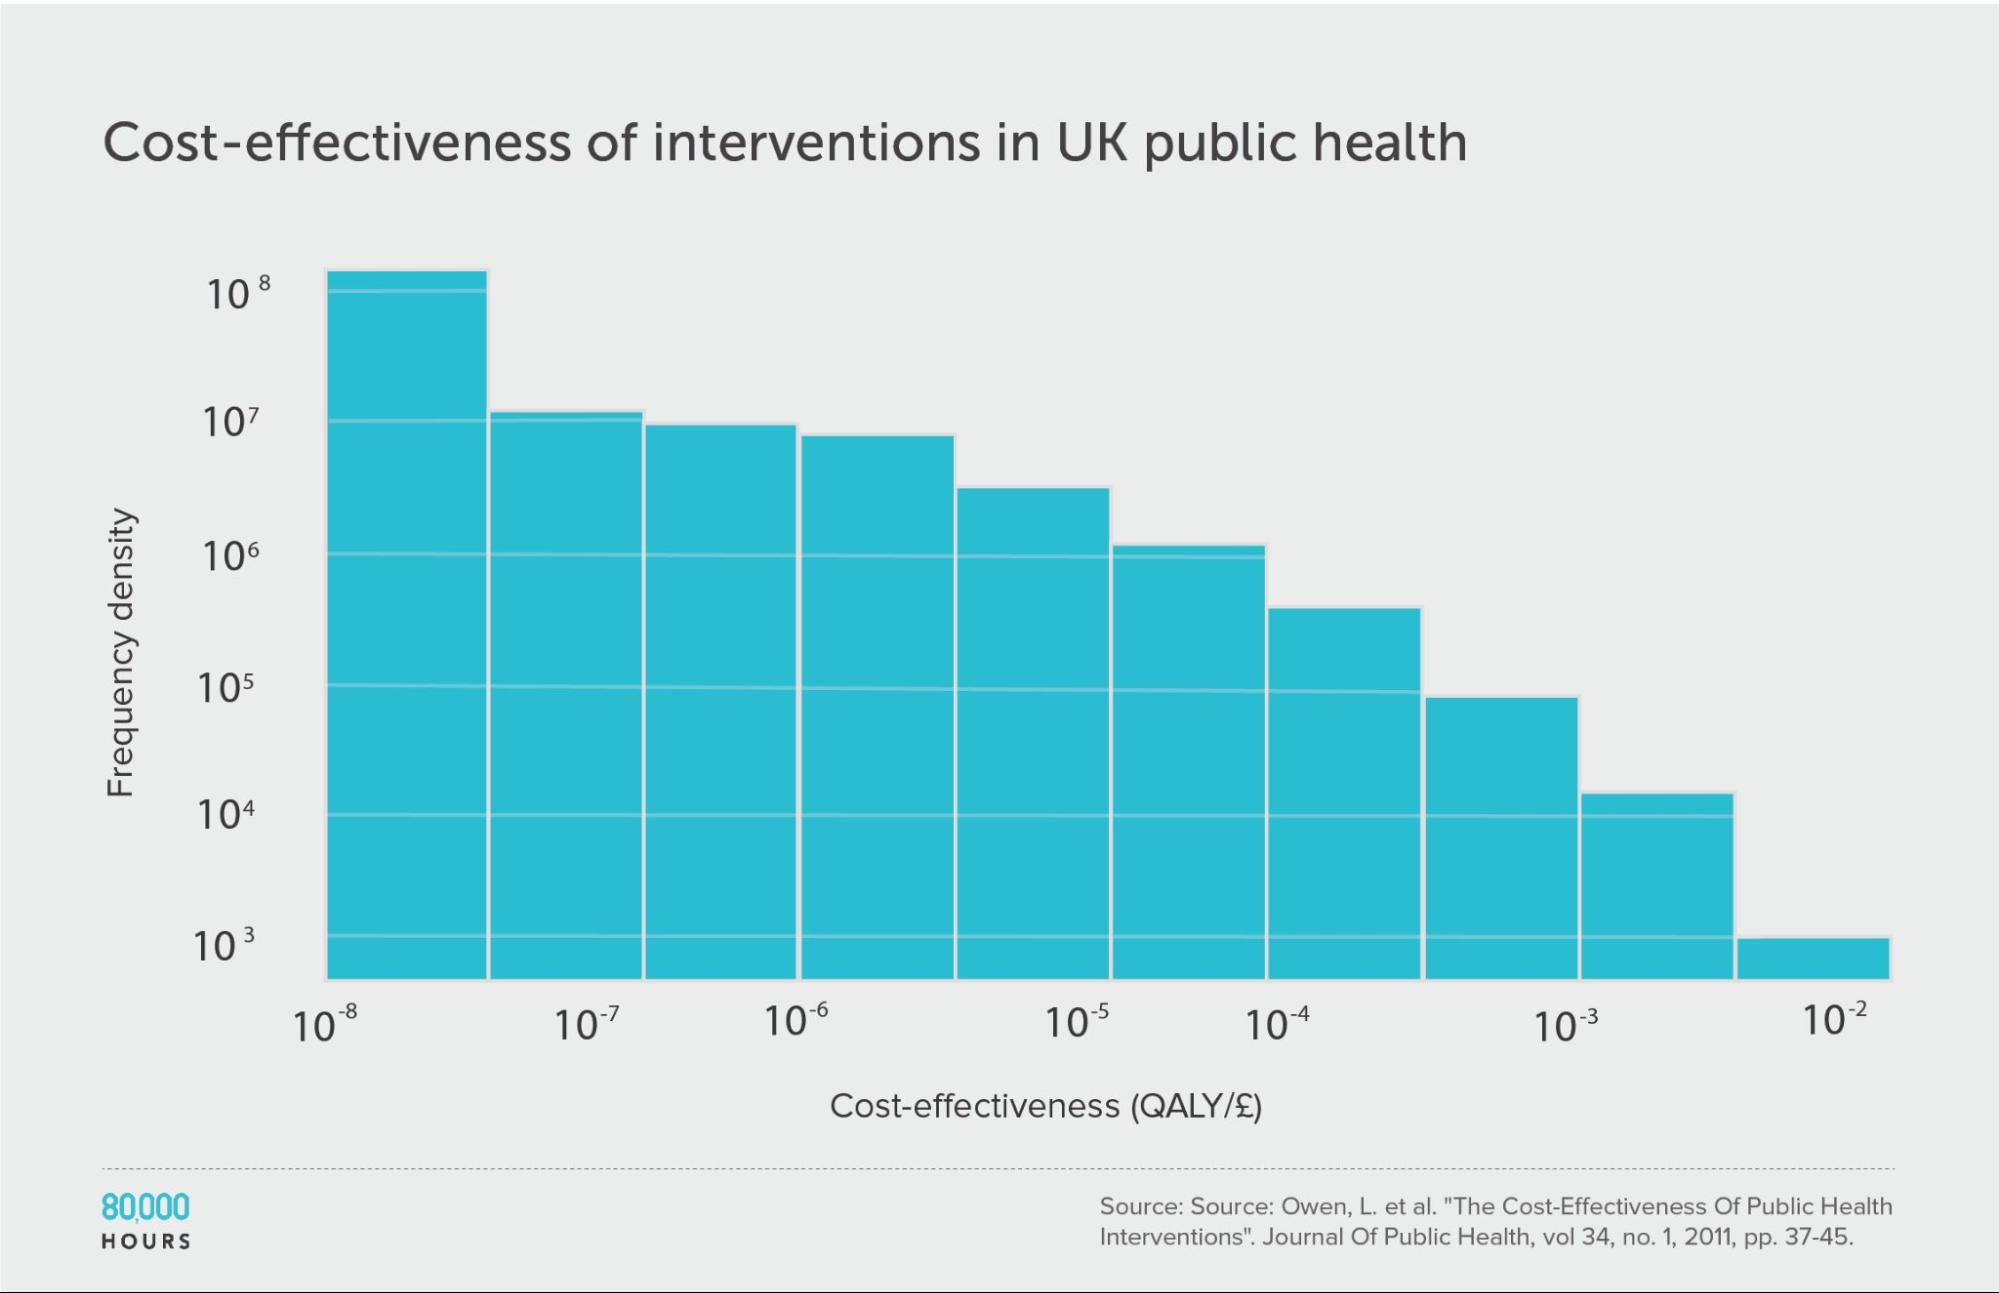 Logarithmic binned histogram showing the cost-effectiveness of UK public health interventions